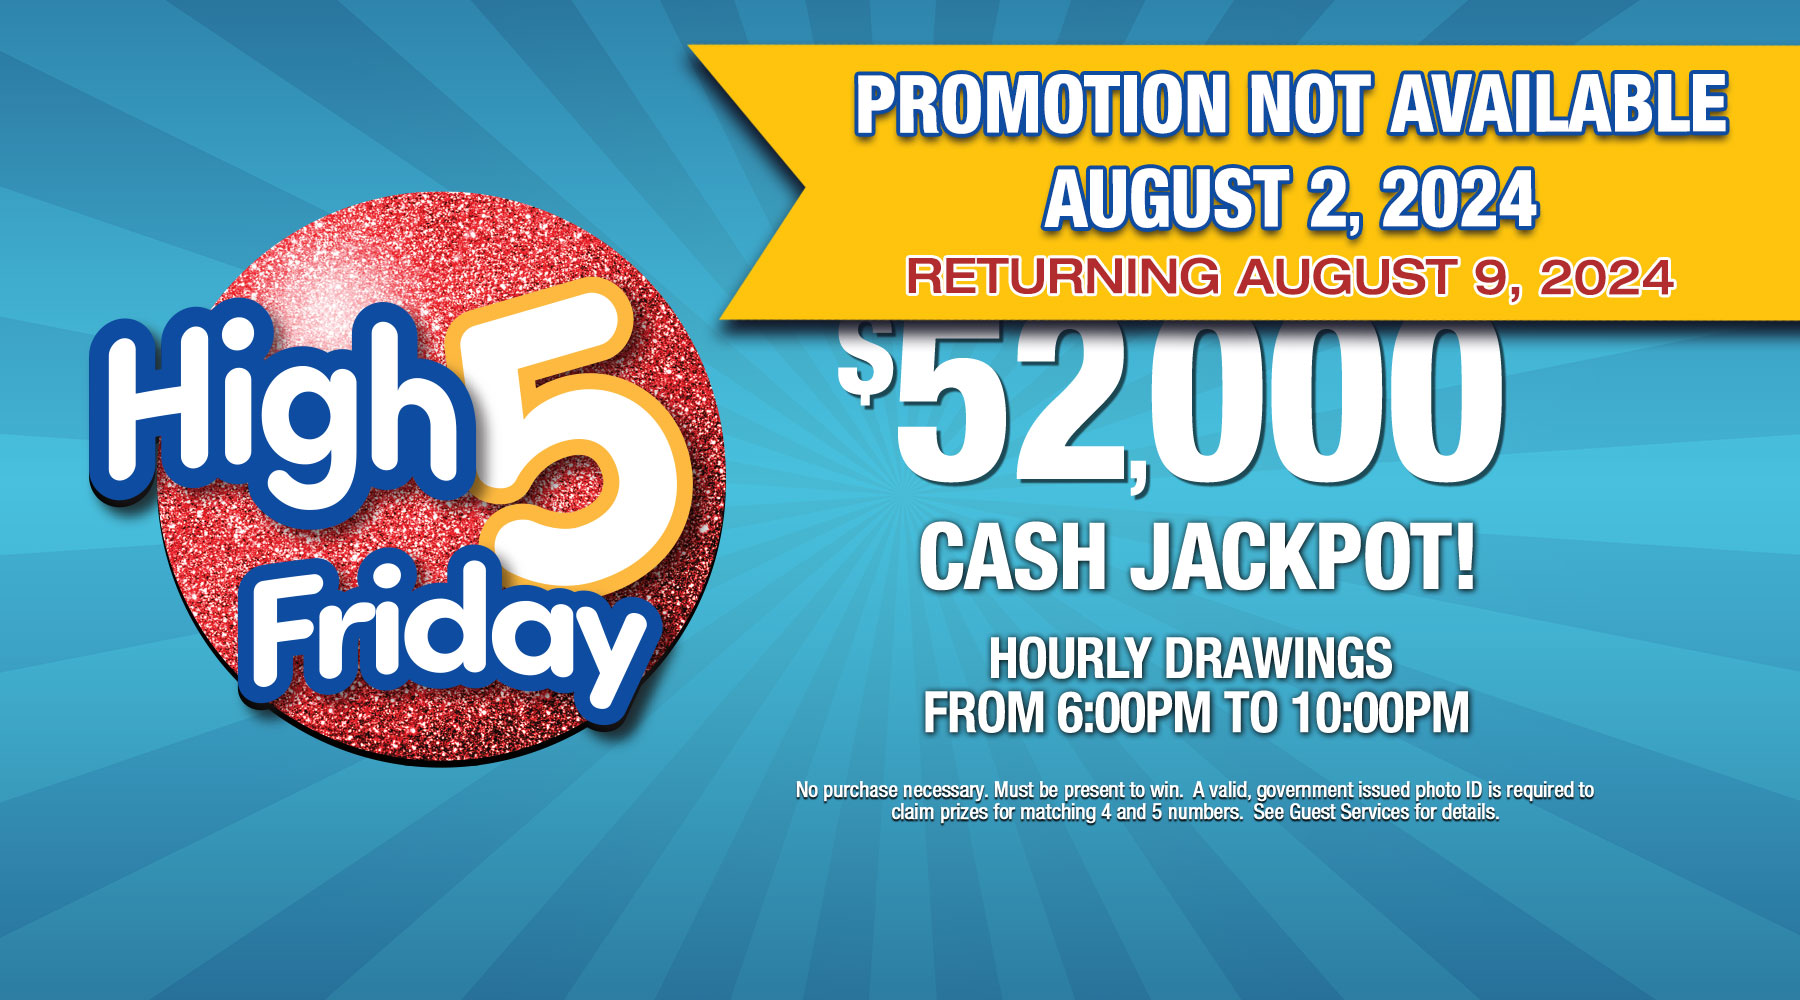 High 5 Friday CASH jackpot starts at $52,000 on Friday, August 9, 2024